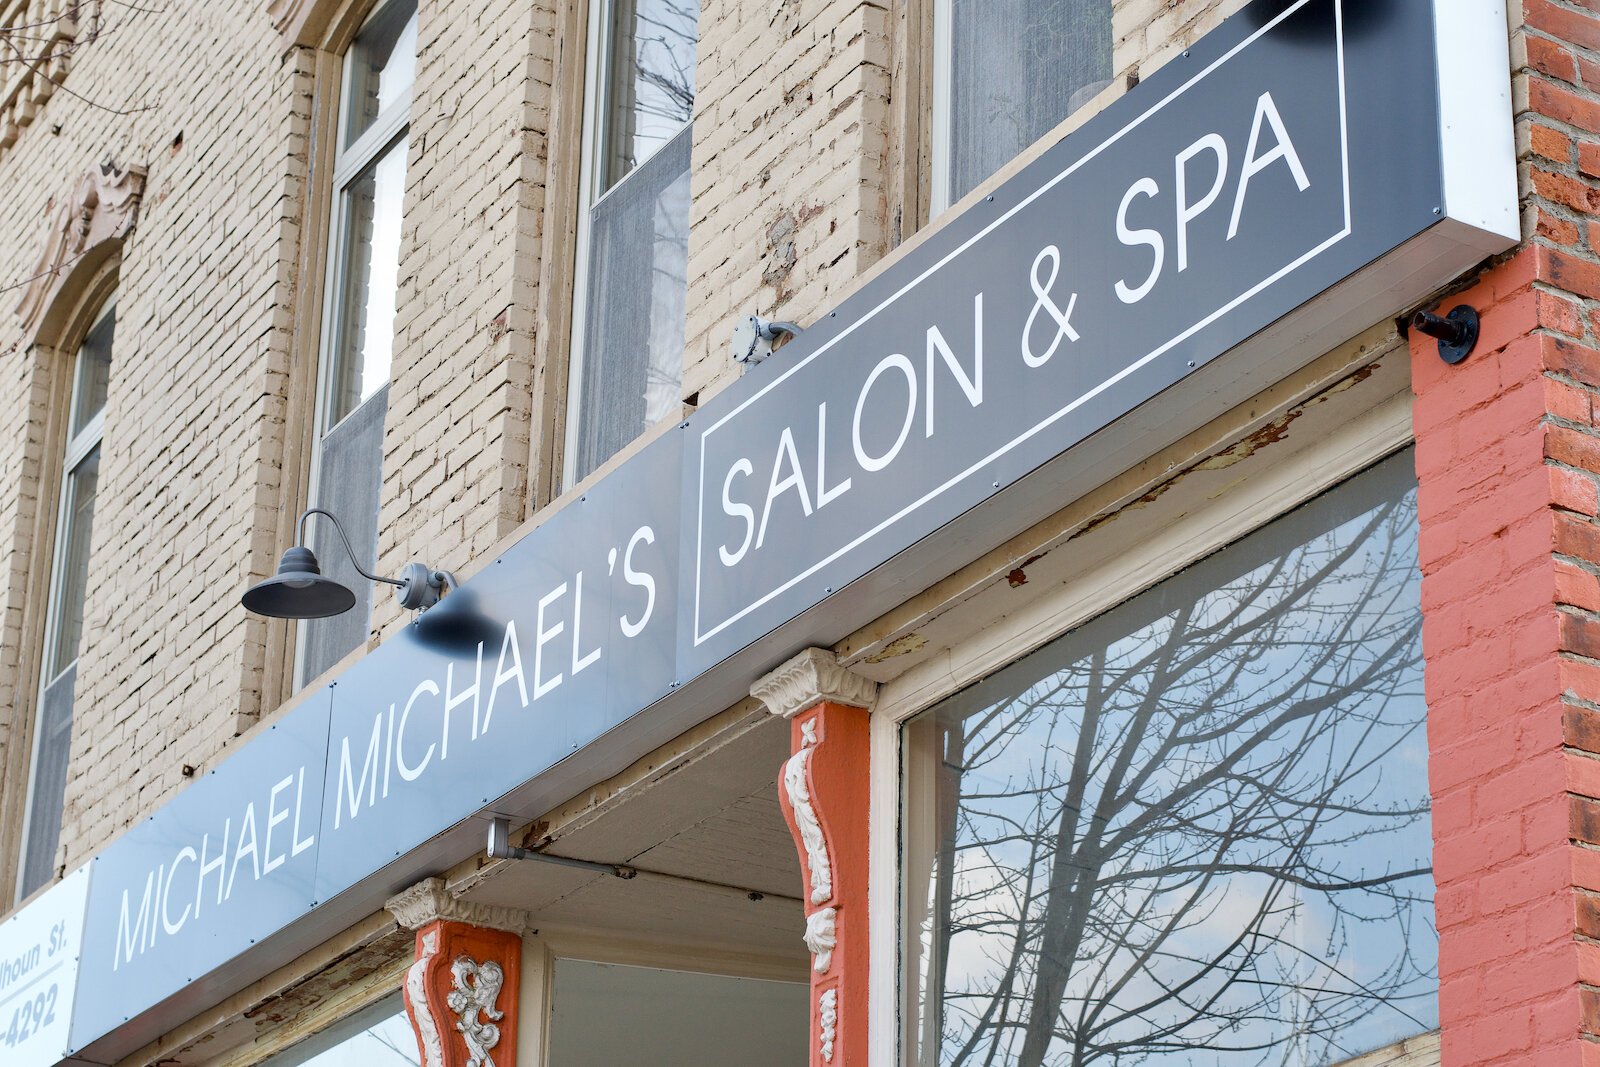 The exterior of Michael Michael's Salon and Spa at 1932 South Calhoun Street.